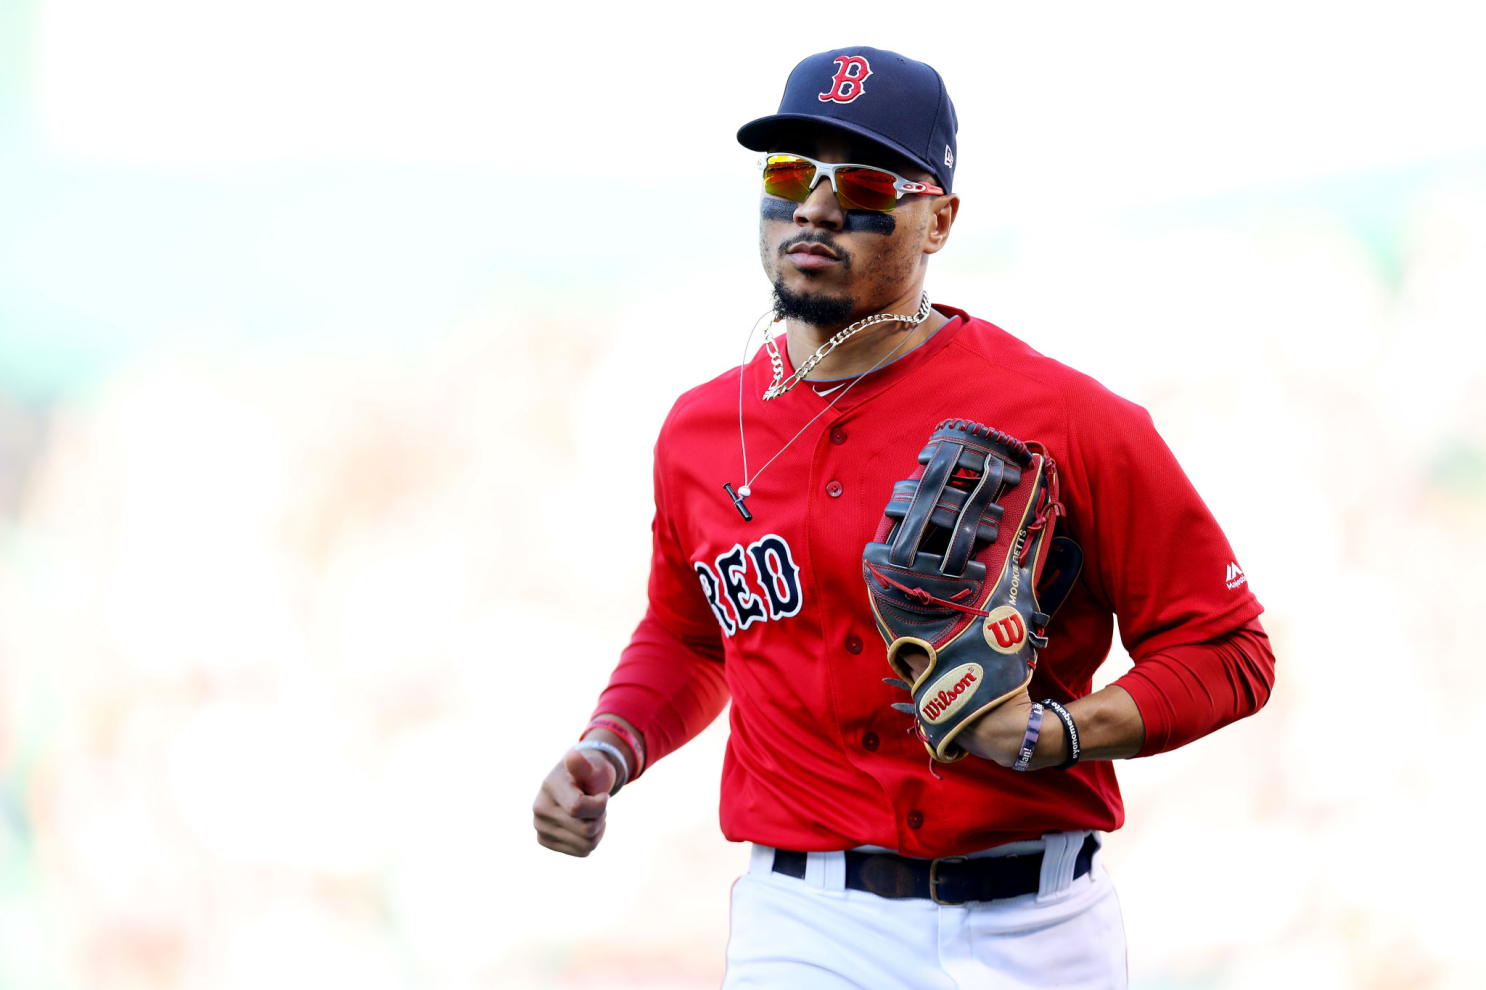 Boston Red Sox will forever regret not keeping Mookie Betts in his